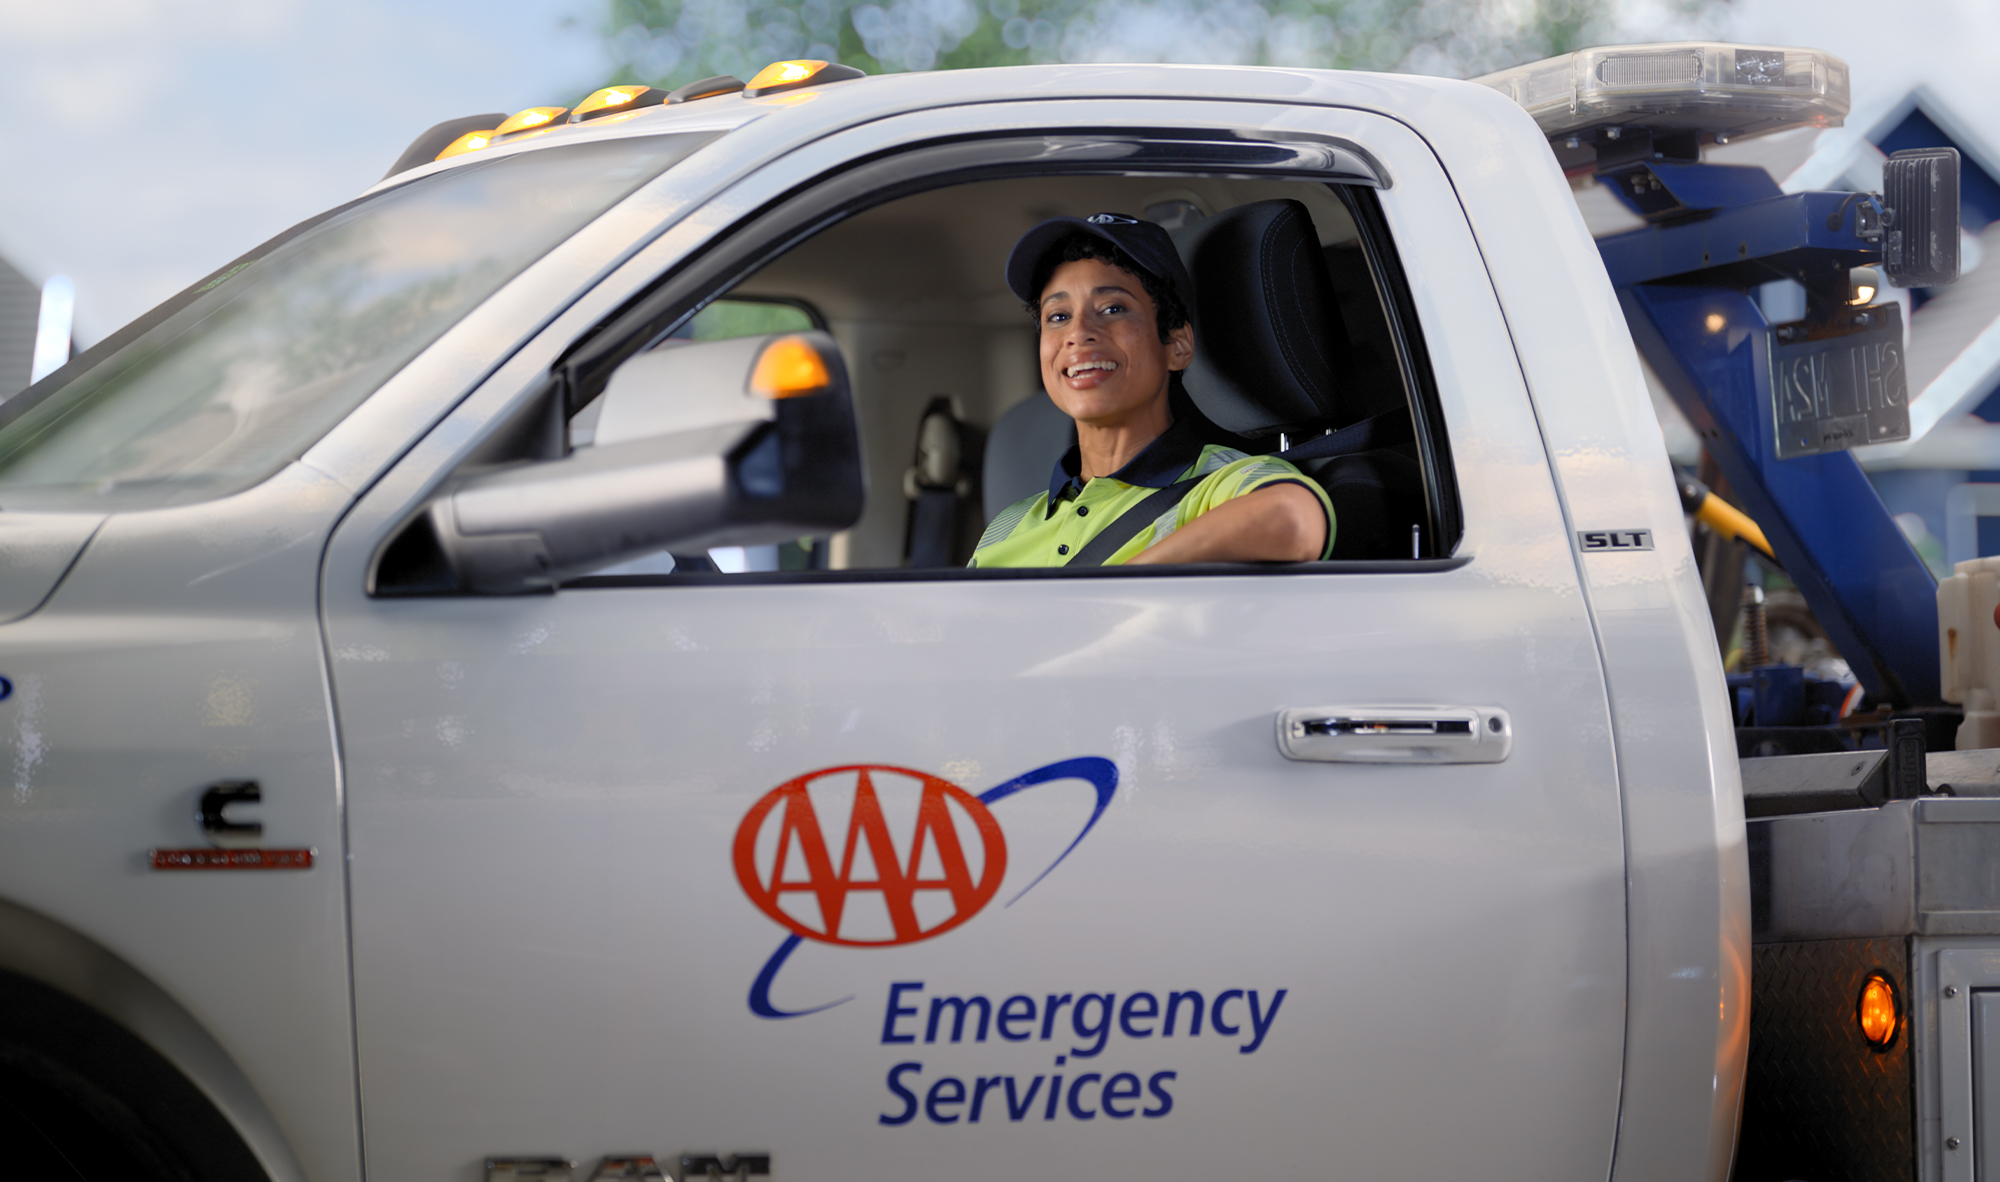 A woman emergency roadside assistance driver leaning out of the window of an AAA truck.